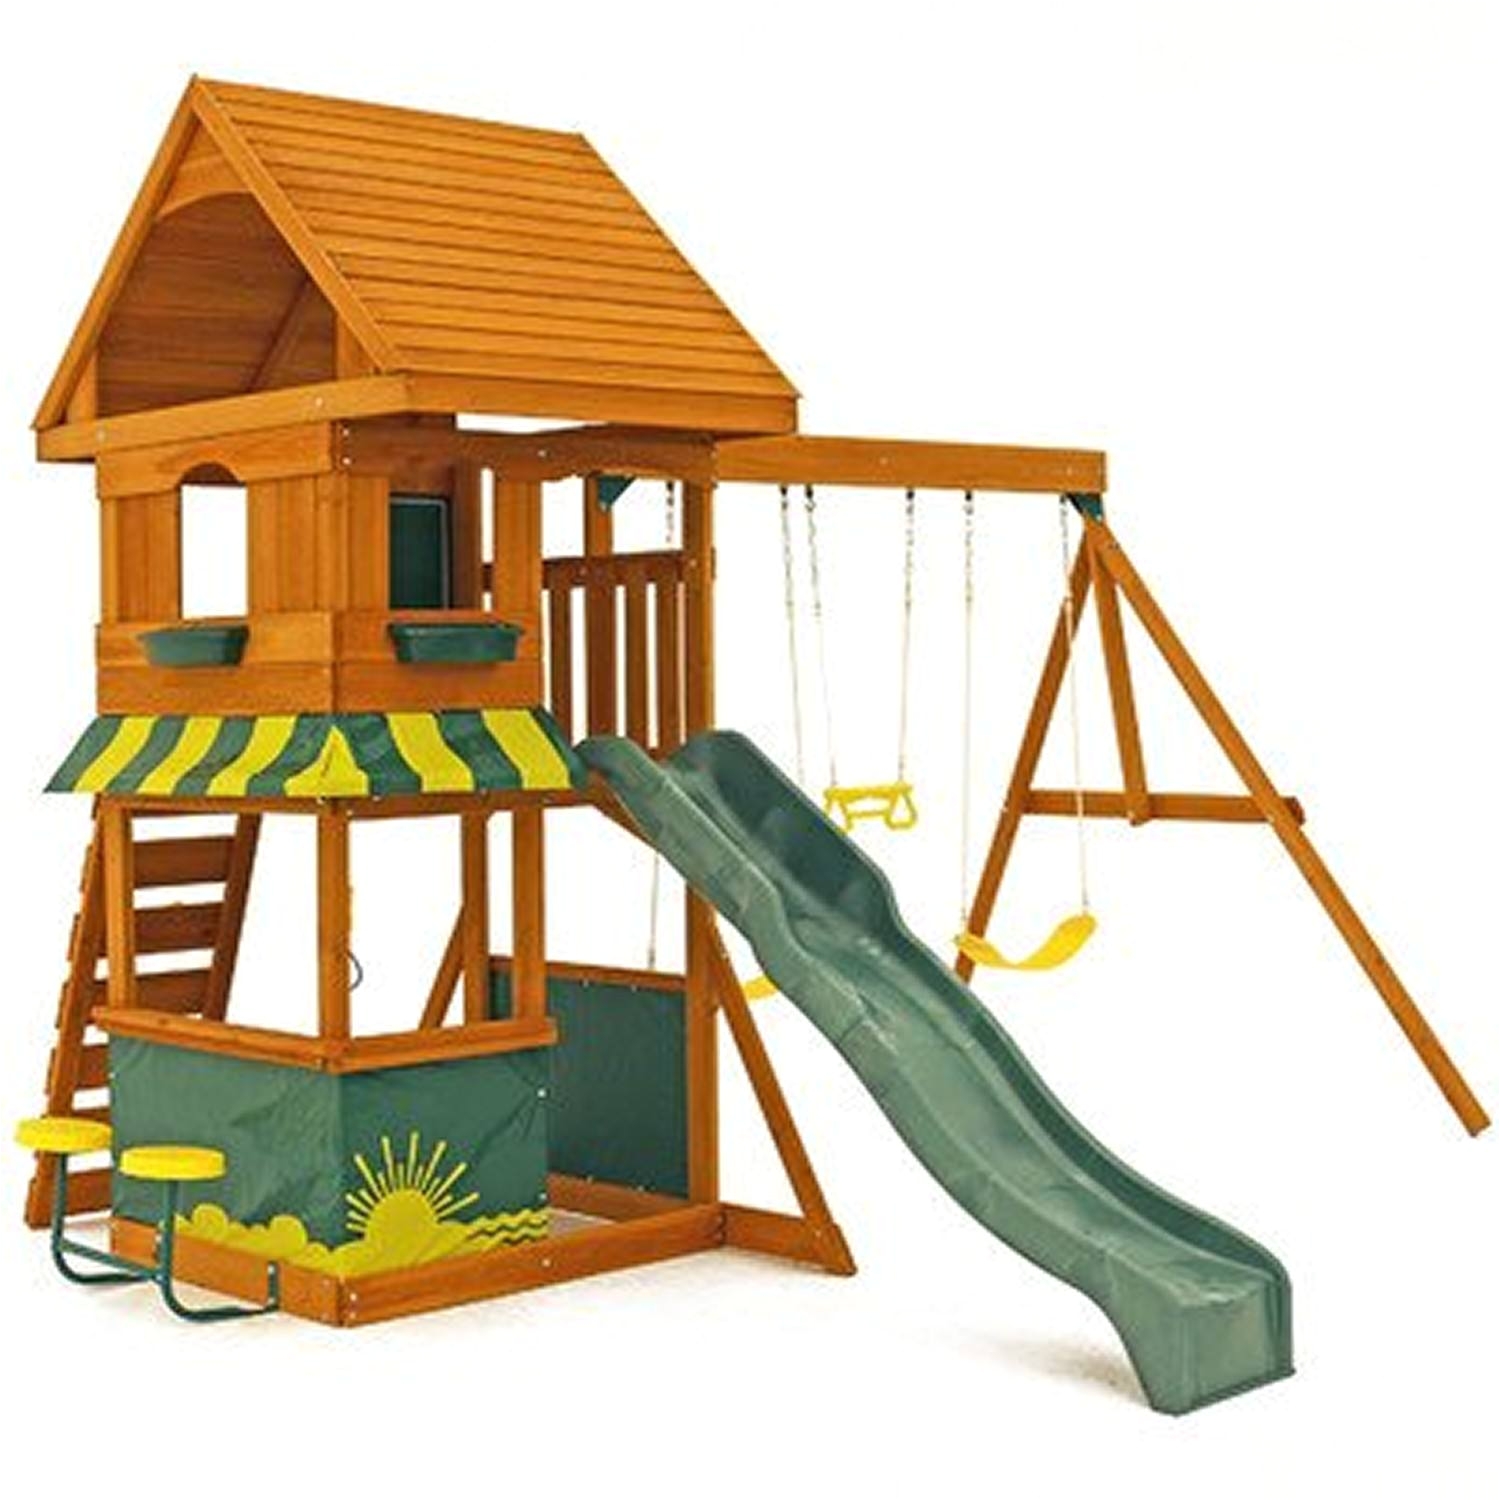 a picture of the big backyard magnolia wooden swing set